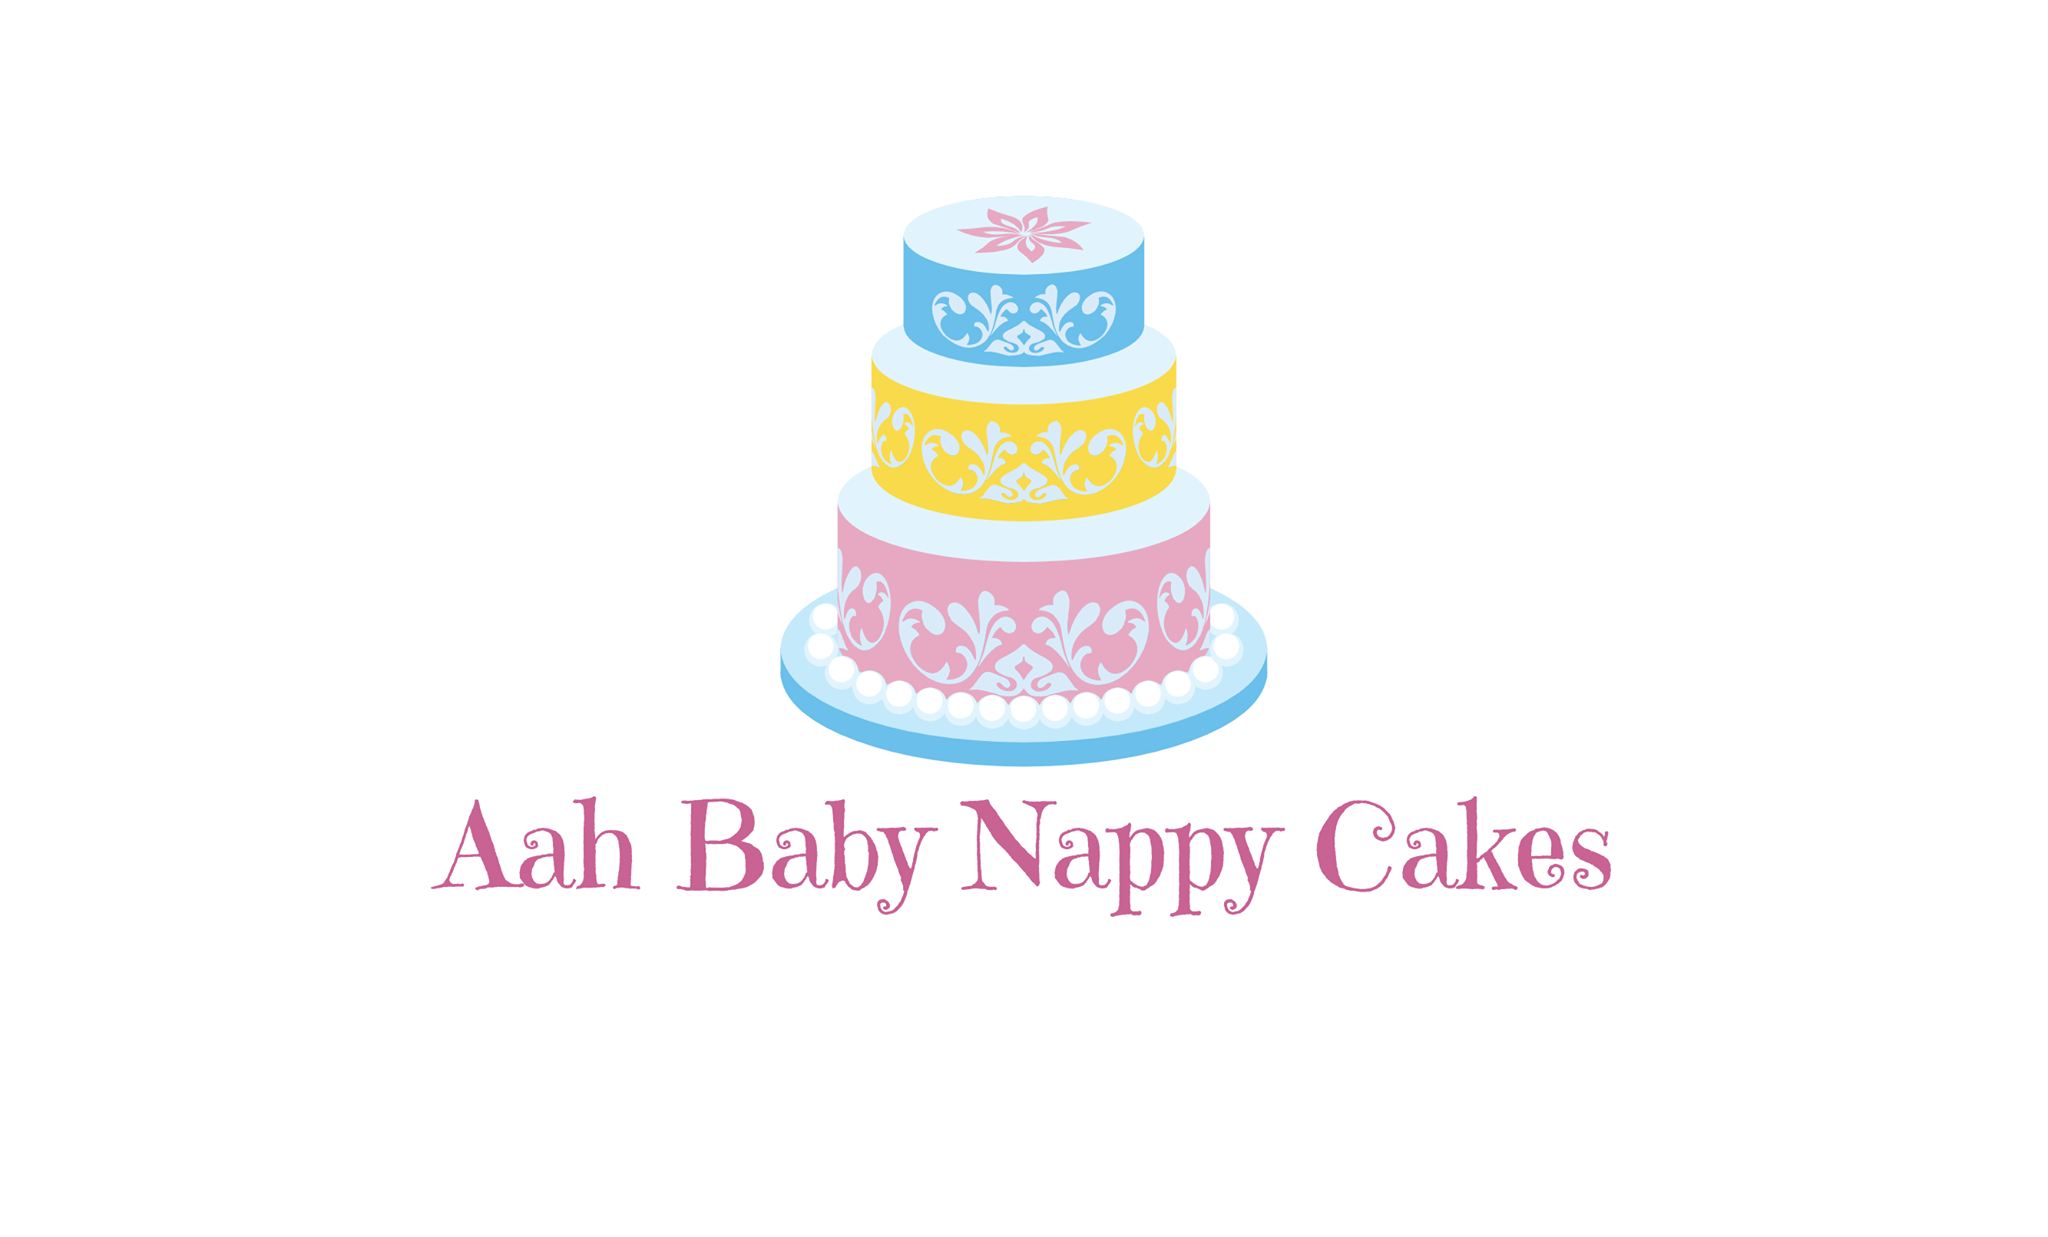 Logo of Aah Baby Nappy Cake